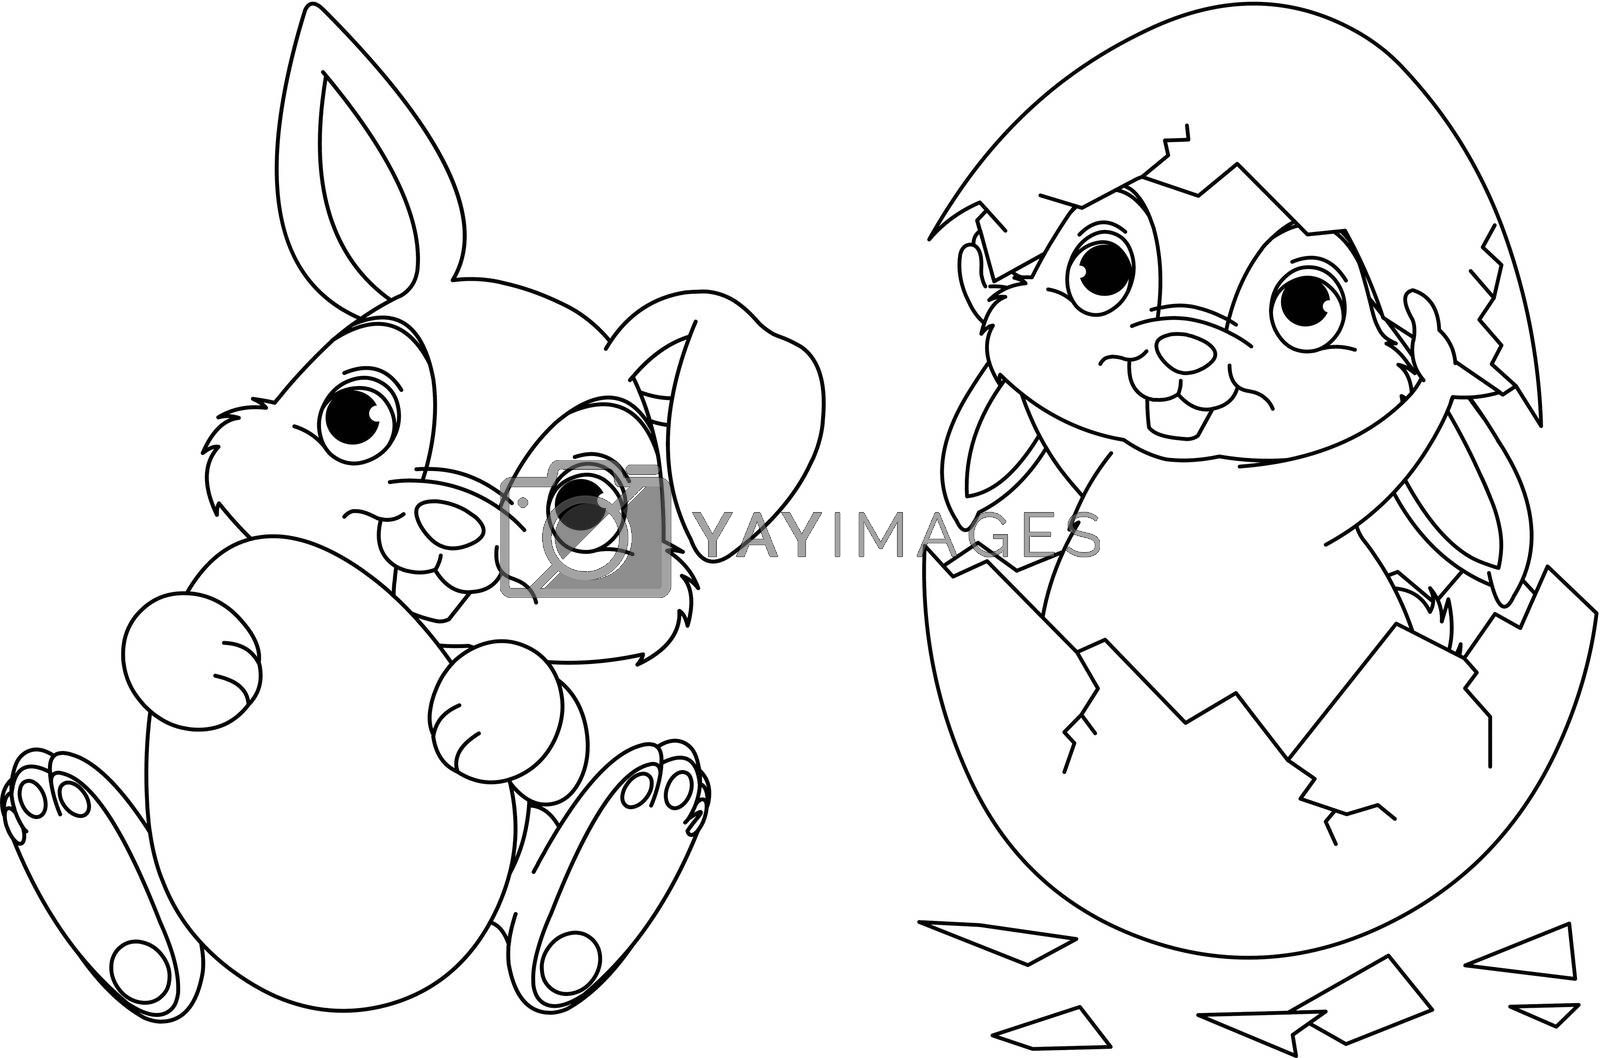 Easter Bunny coloring page Royalty Free Stock Image | Stock Photos, Royalty  Free Images, Vectors, Footage | Yayimages